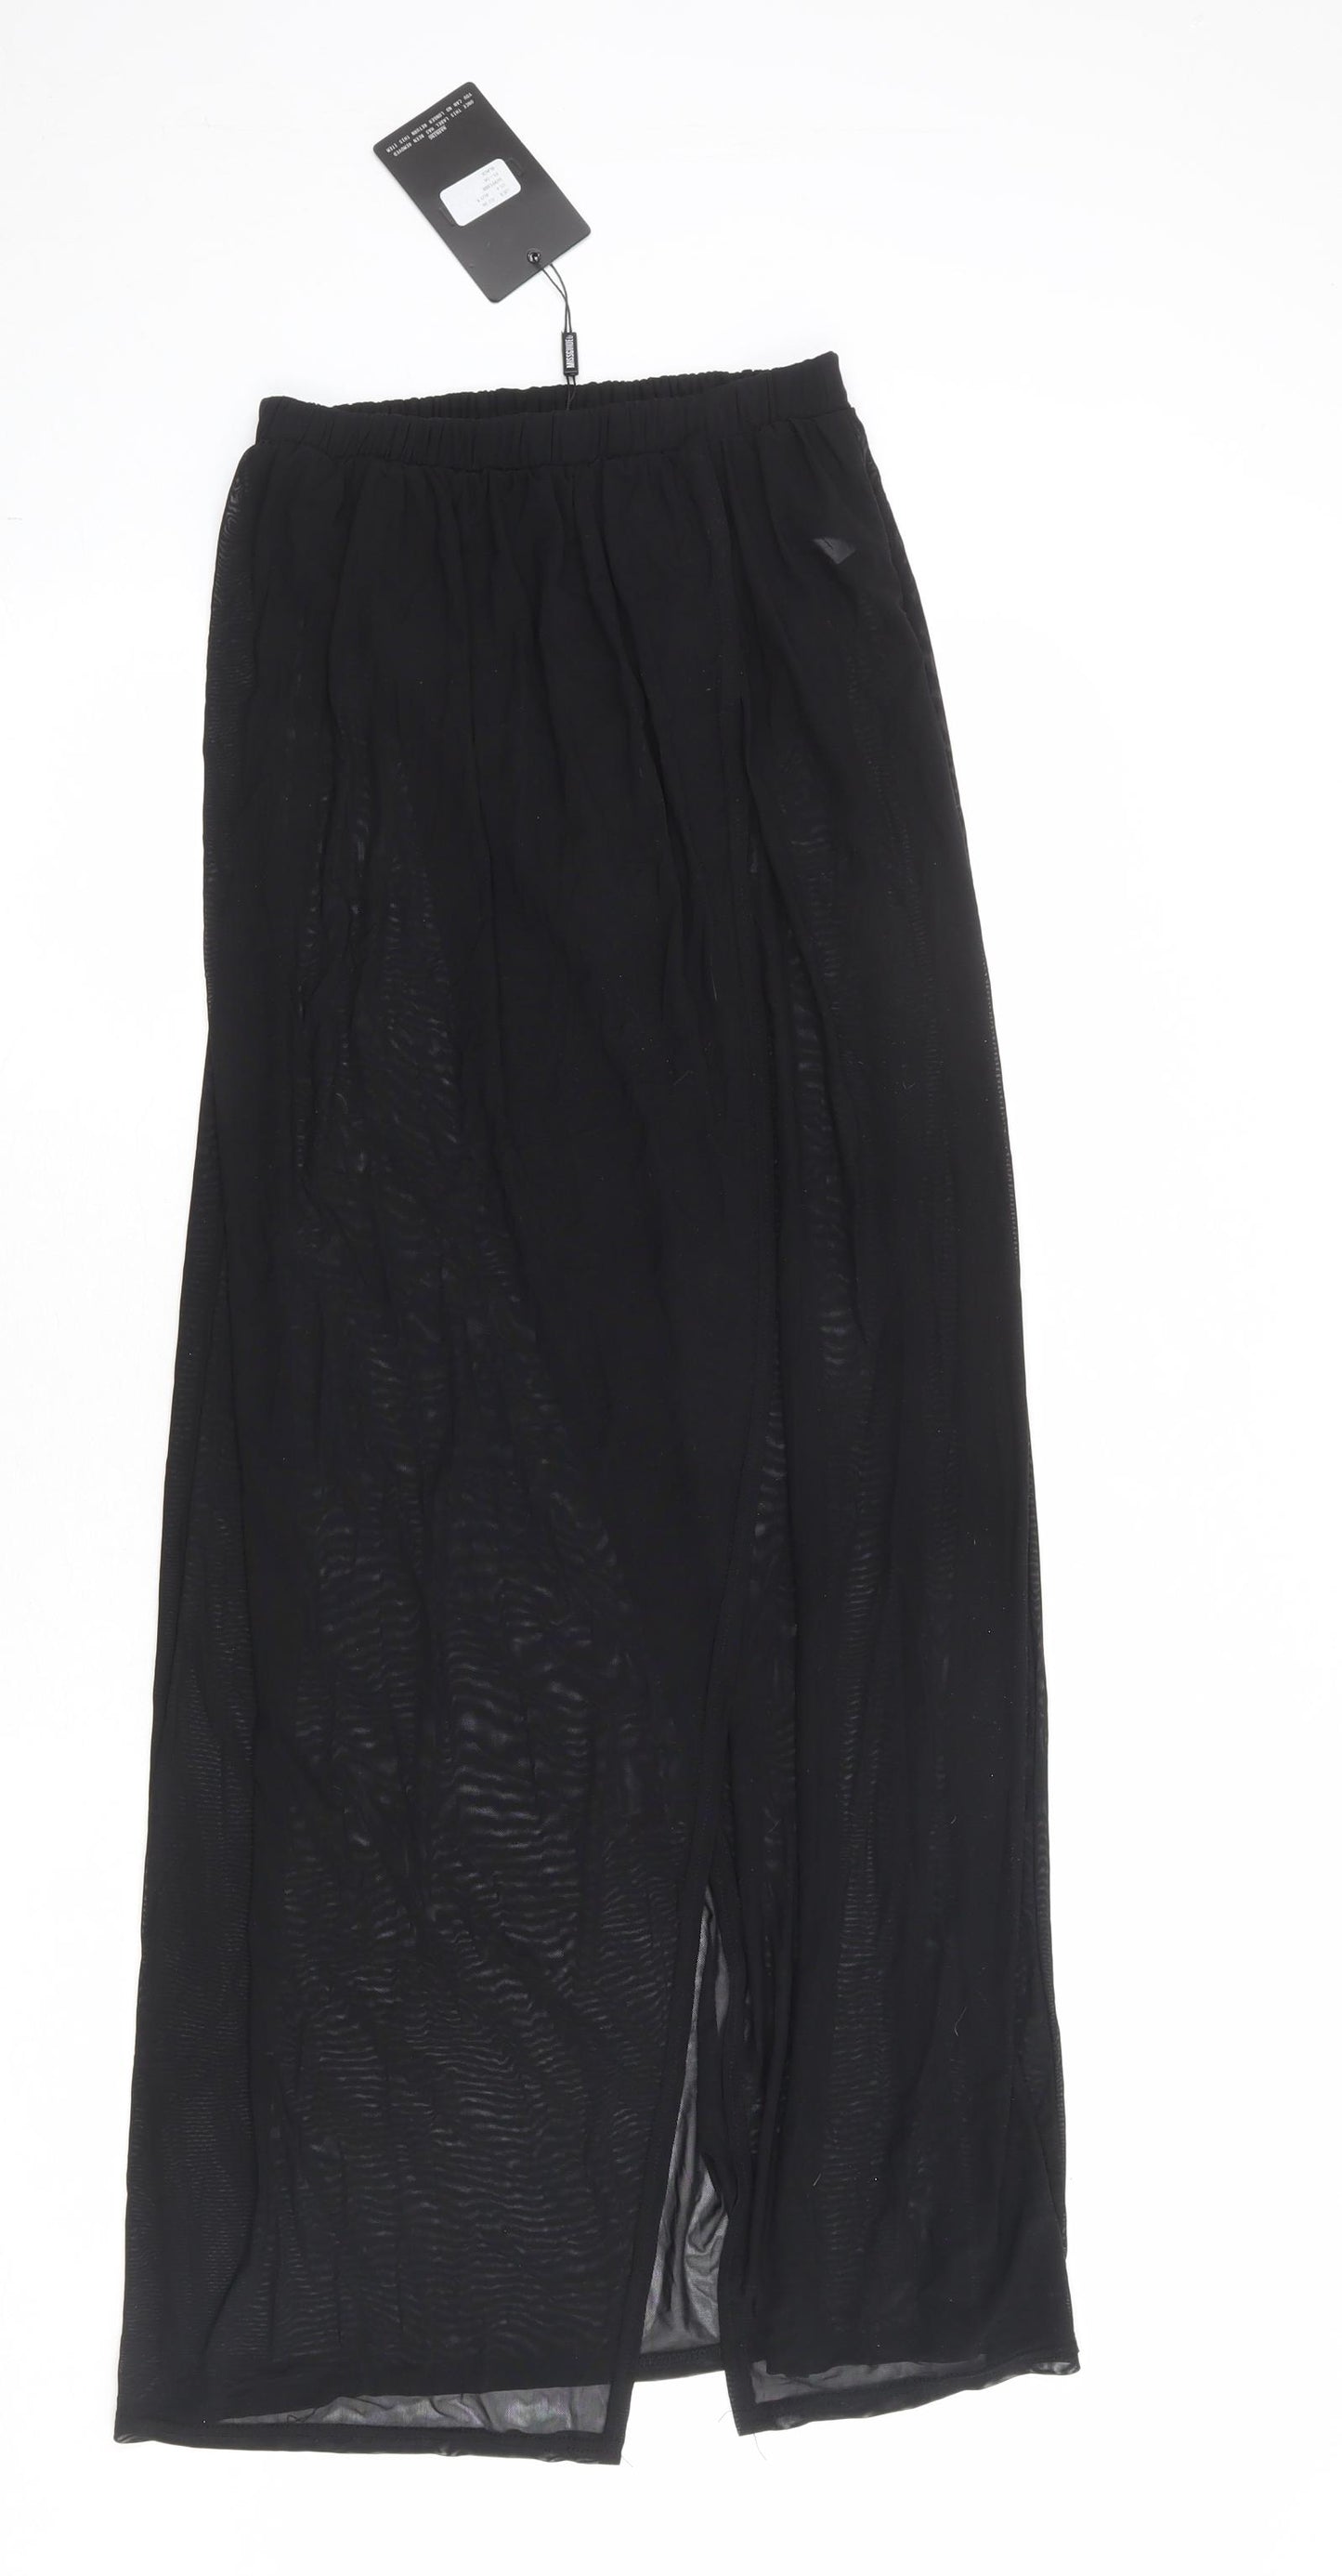 Missguided Womens Black Polyester A-Line Skirt Size 8